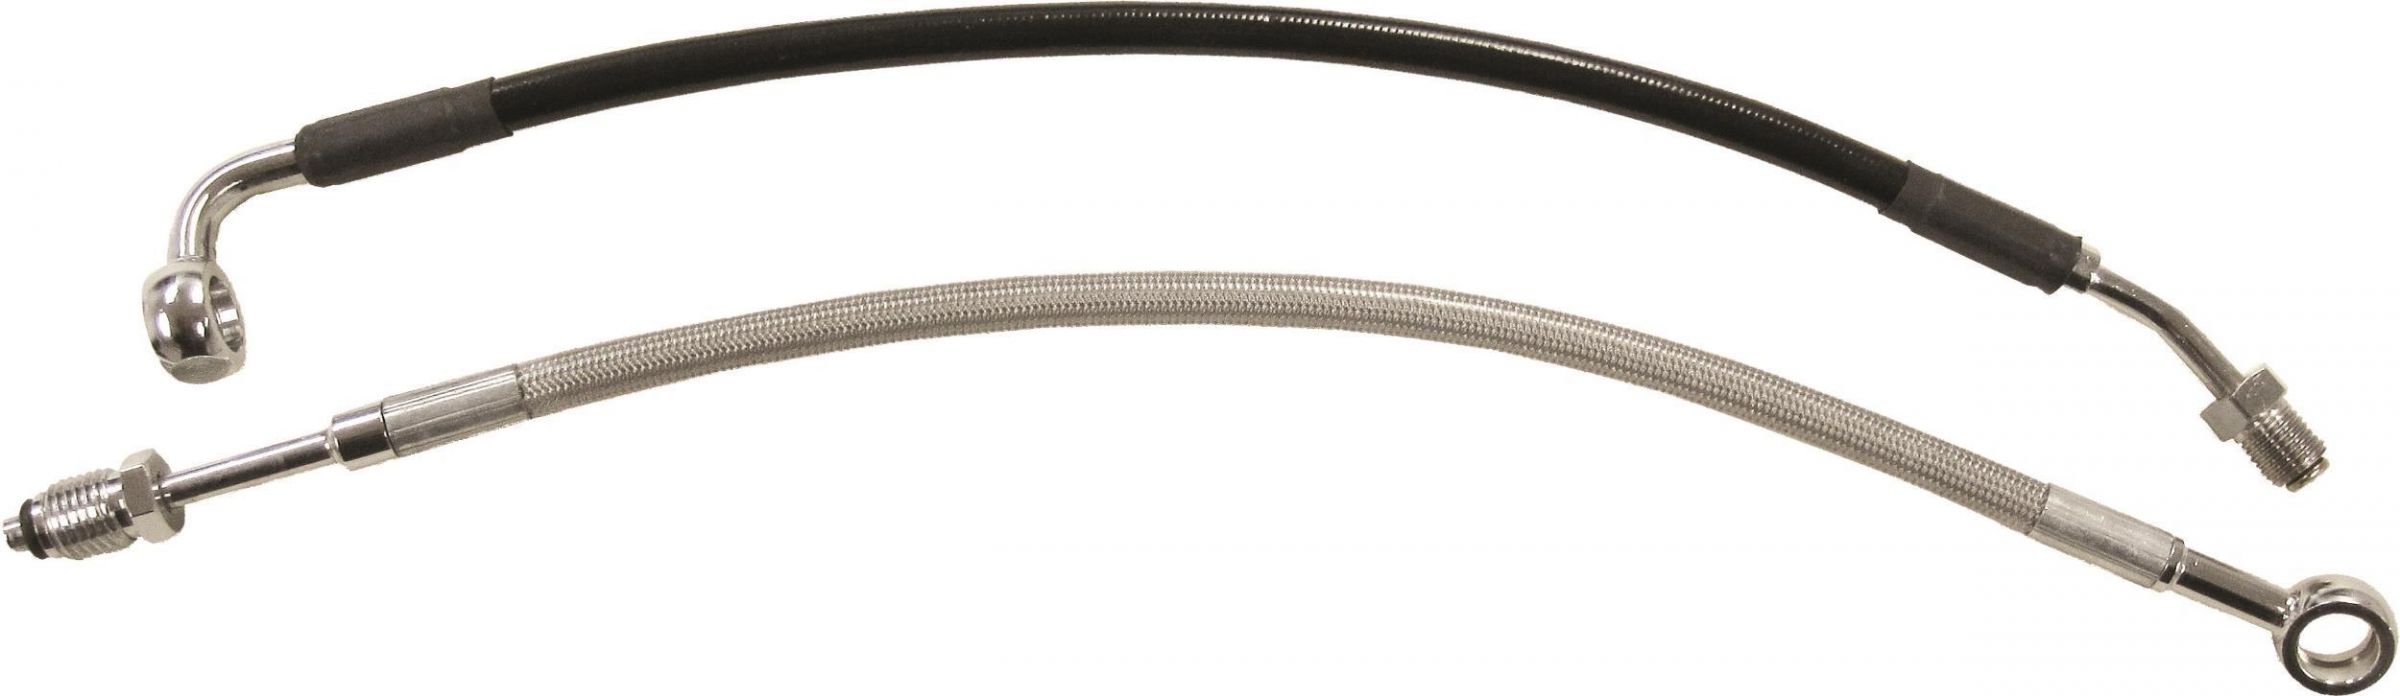 86OH-GOODRIDG-HD0005-1CBK-6 Stainless Steel Braided Hydraulic Clutch Line Kit - 6in. Over Stock - Black Hose